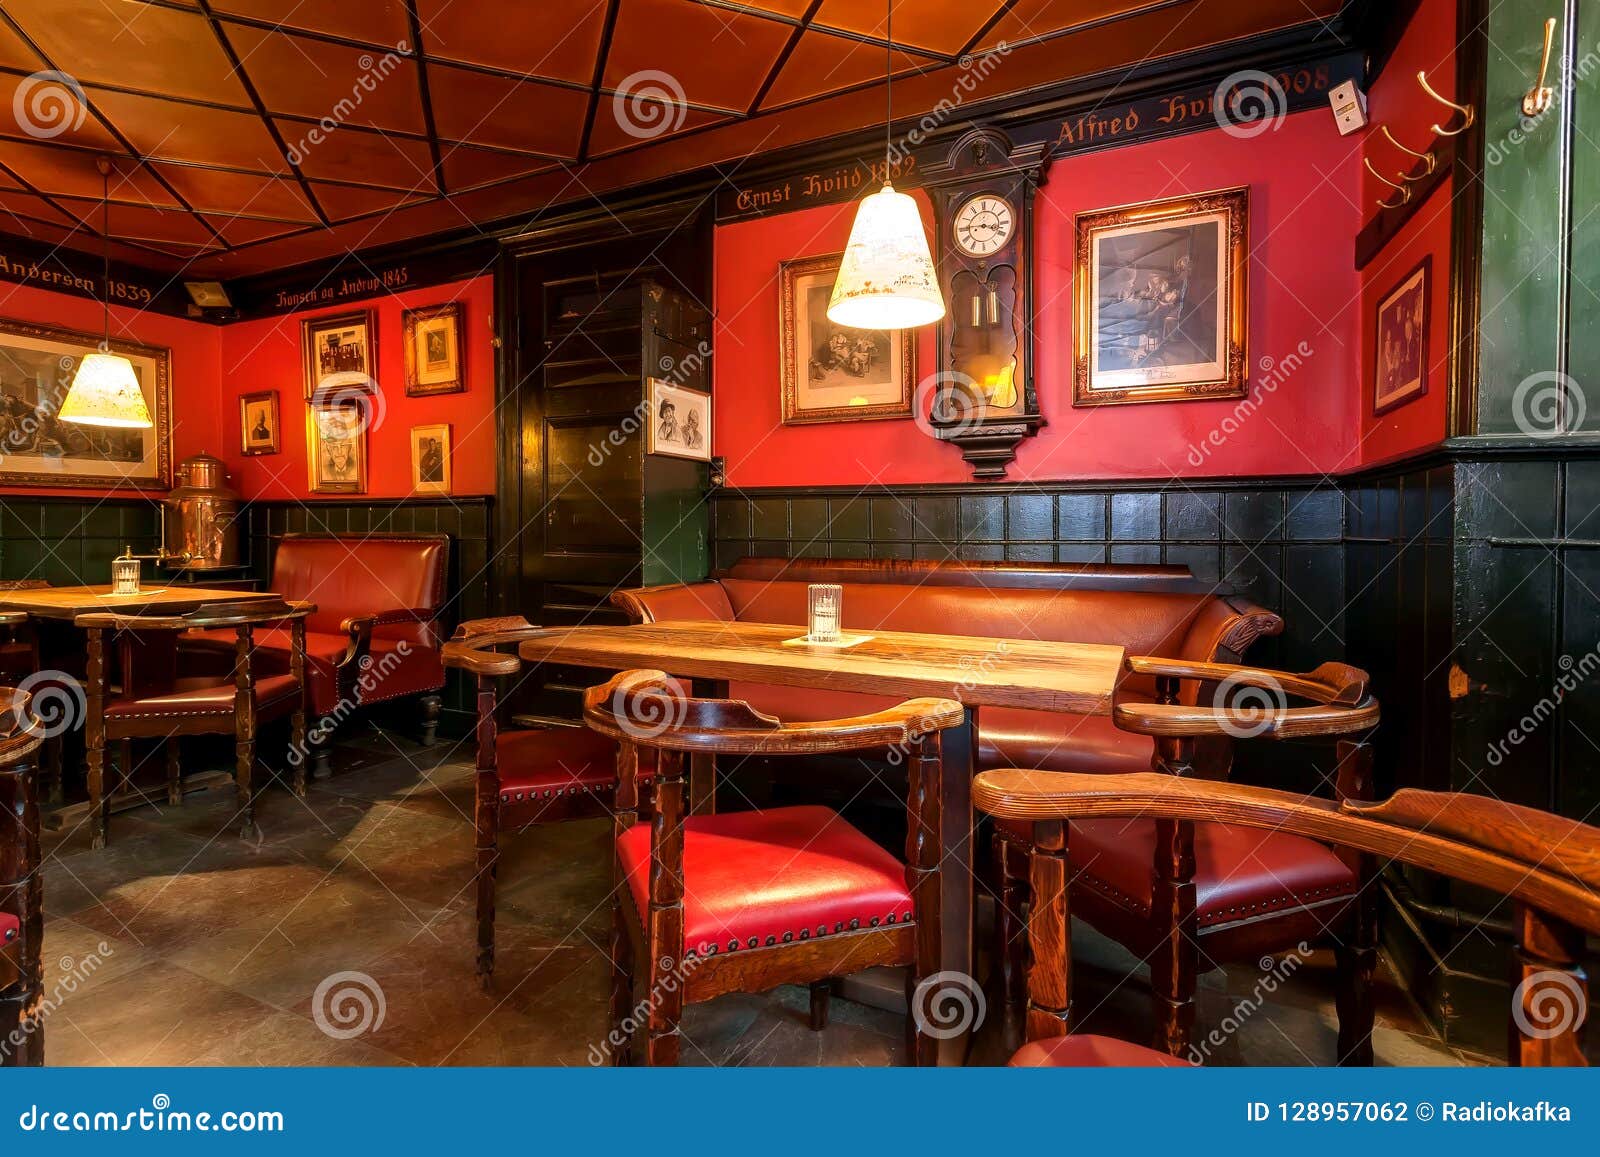 Cozy Bar Interior Waiting For Drinkers Inside Vintage Room With